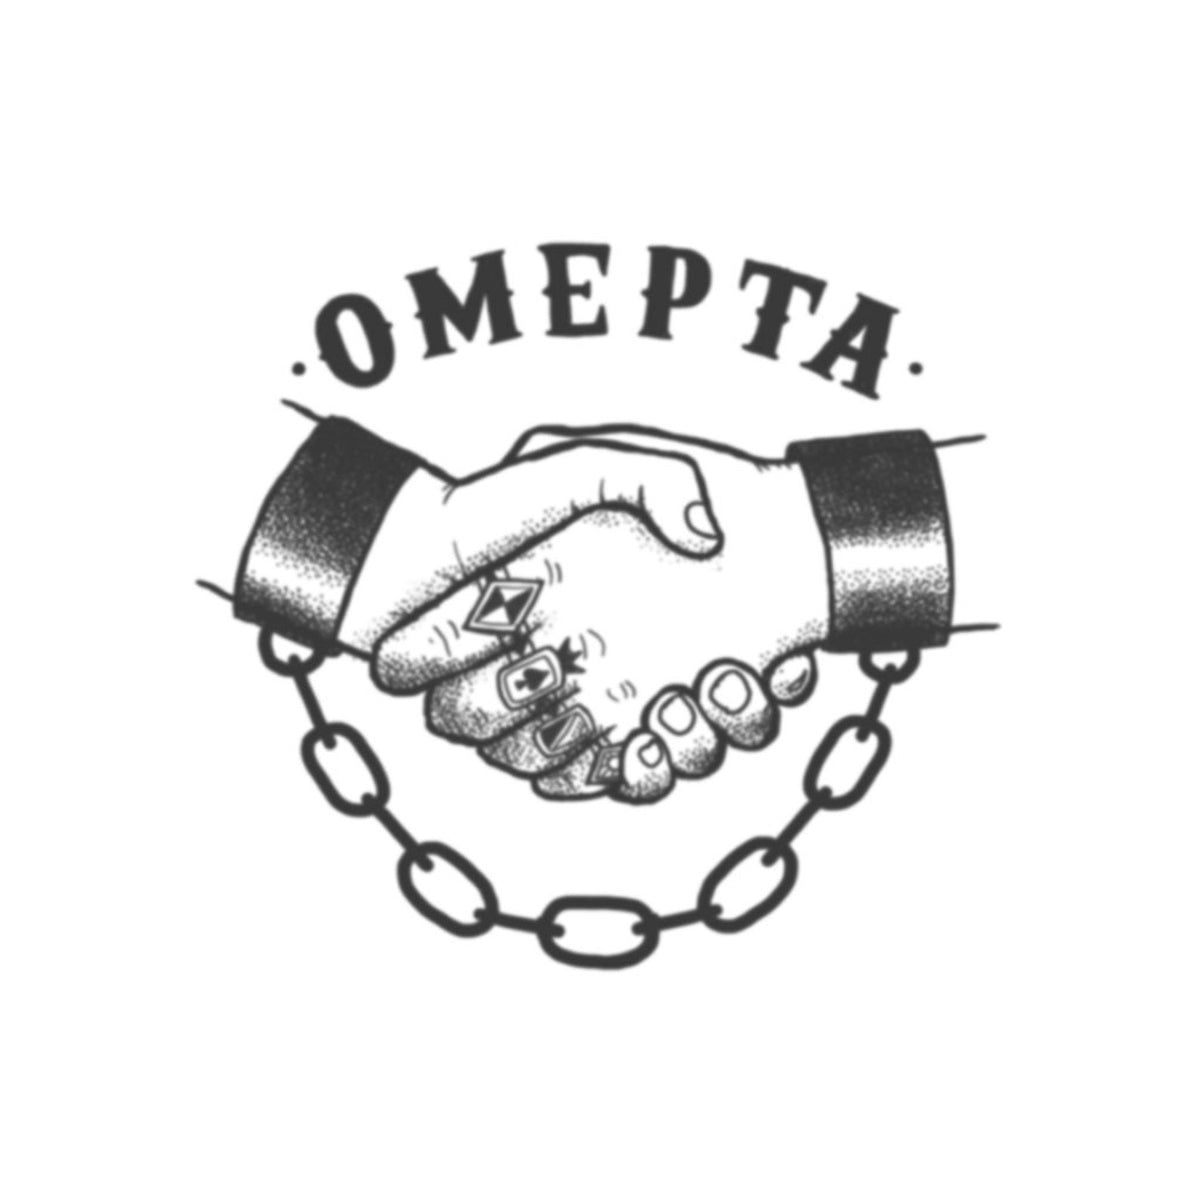 Omerta Temporary Tattoo (Vow of Silence) – TattooIcon